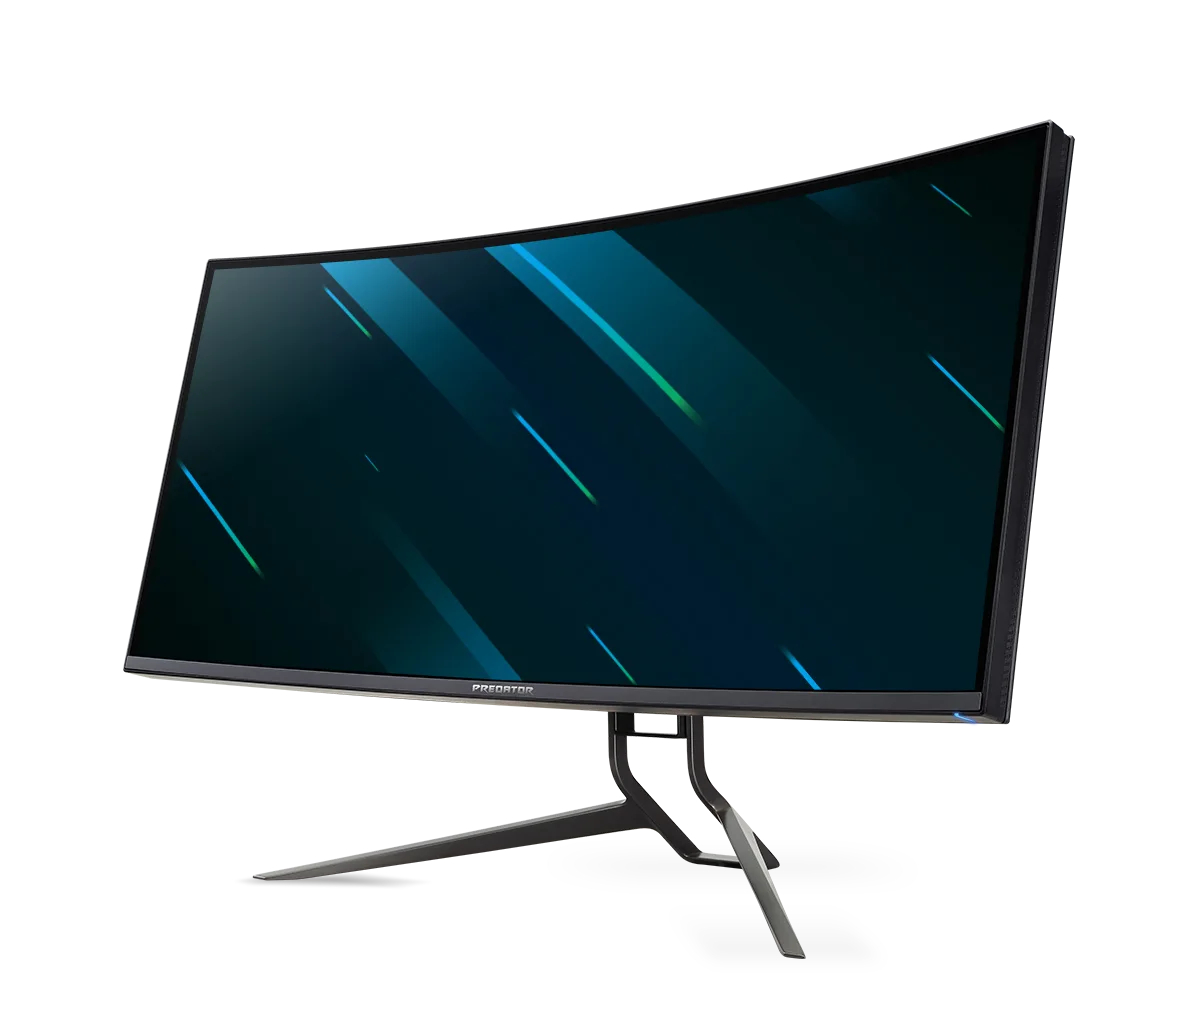 Acer Predator 2 Size Over Speed With Acers Predator Monitors